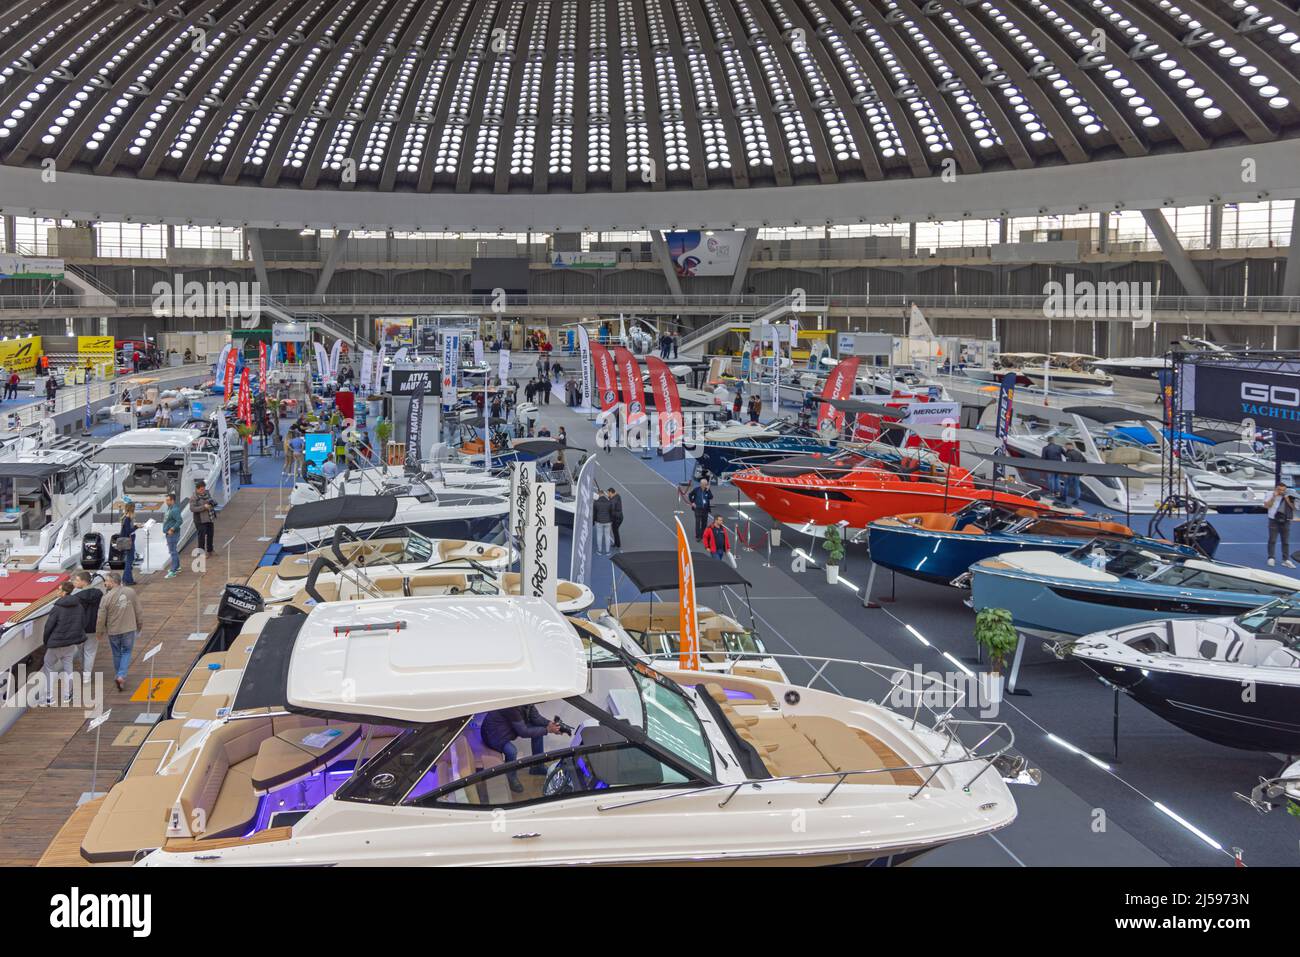 Belgrade, Serbia - April 07, 2022: Yachts and Boats at Nautical Hunting Fishing Show Expo in Large Fairground Hall. Stock Photo